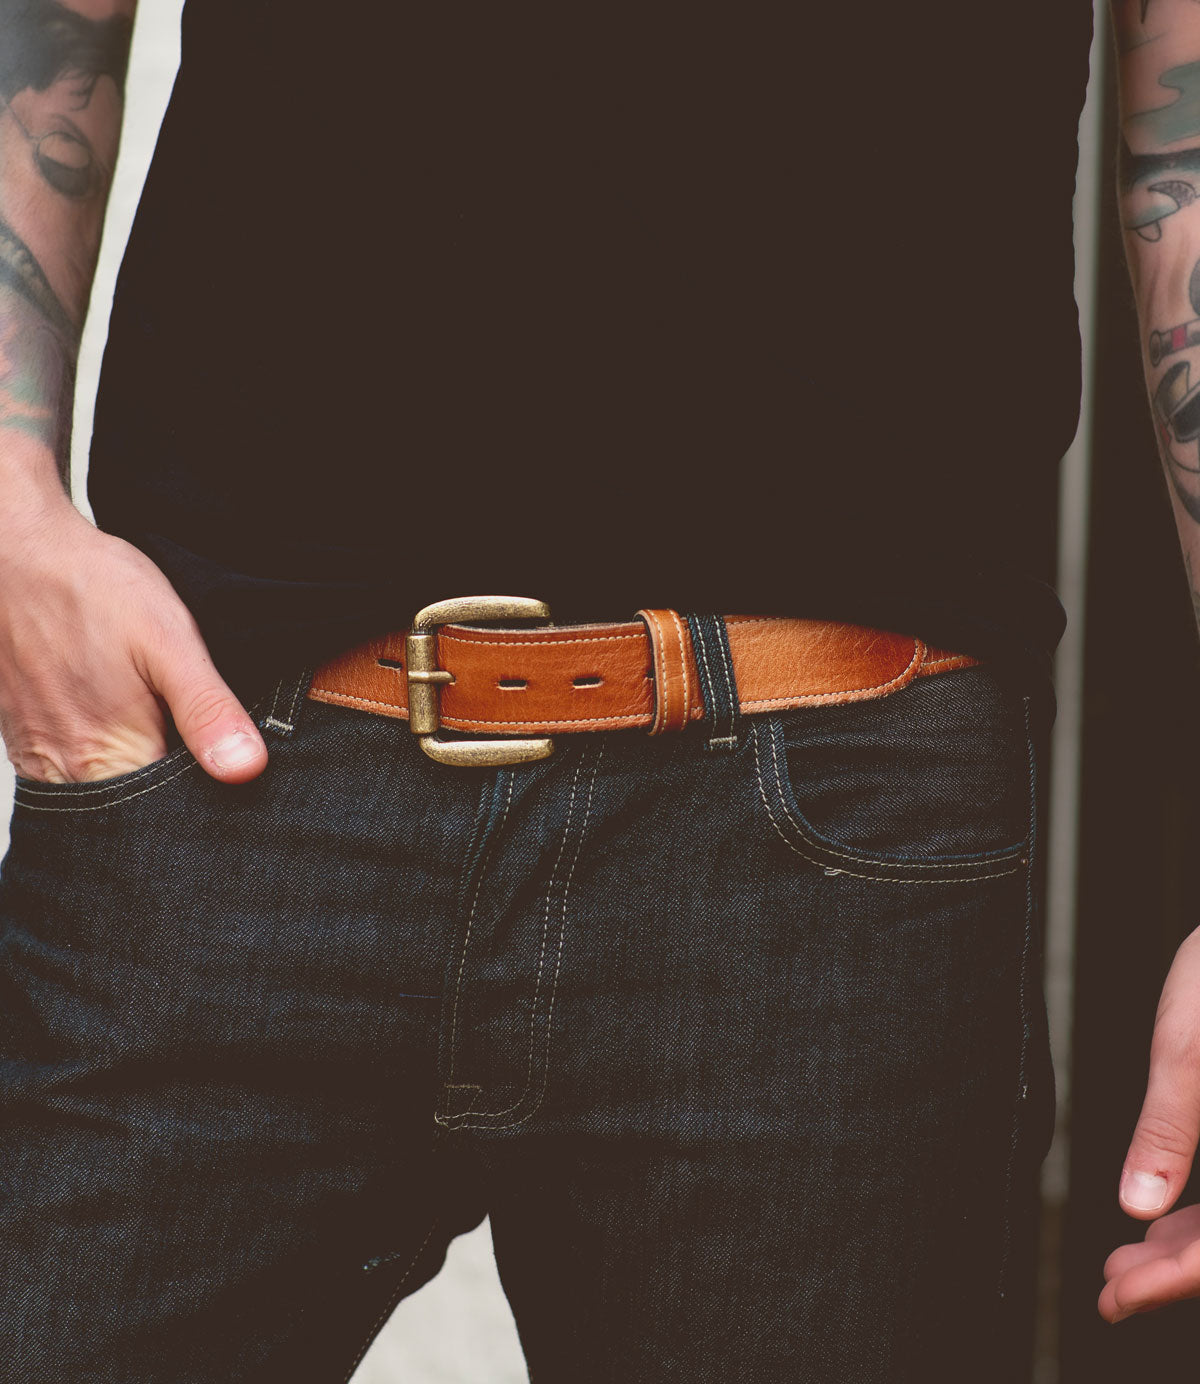 A person wearing a black shirt and dark jeans with a Meander belt by Bed Stu featuring a removable buckle and tattoos on their arms.